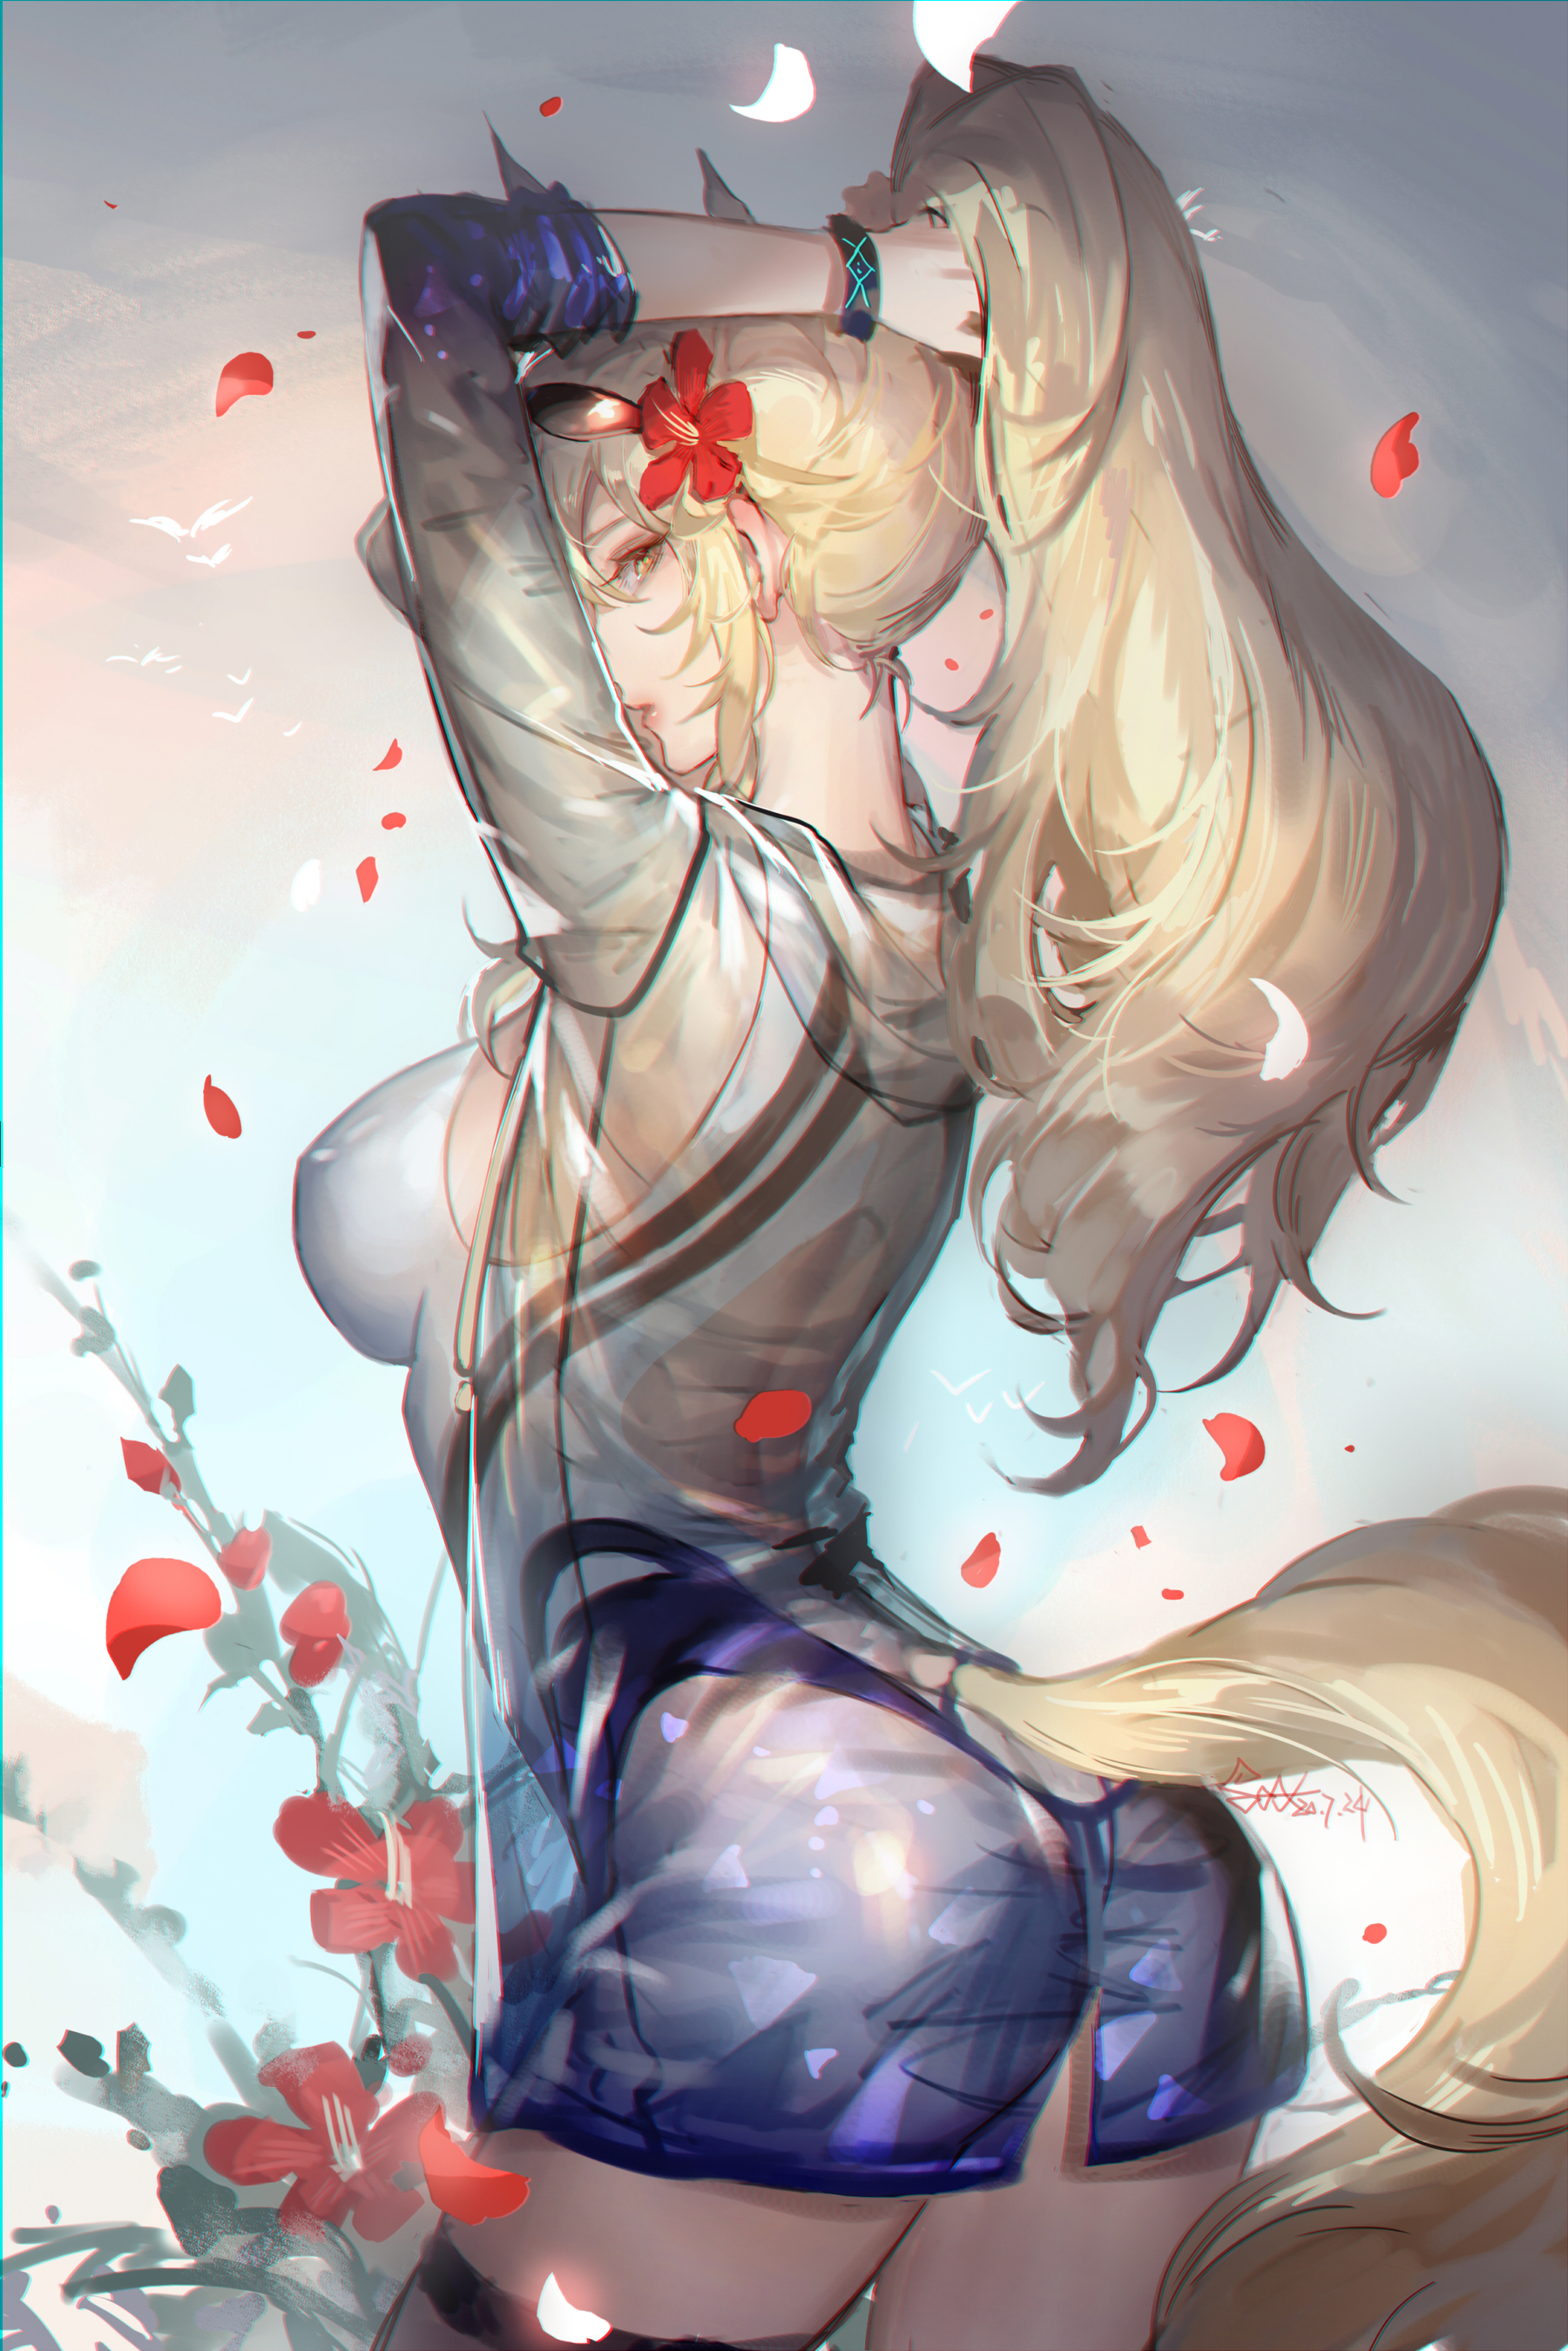 Anime 1800x2698 anime anime girls digital art artwork 2D portrait display Spade-M Arknights Nearl(Arknights) animal ears tail blonde ponytail see-through clothing one-piece swimsuit Kazimierz